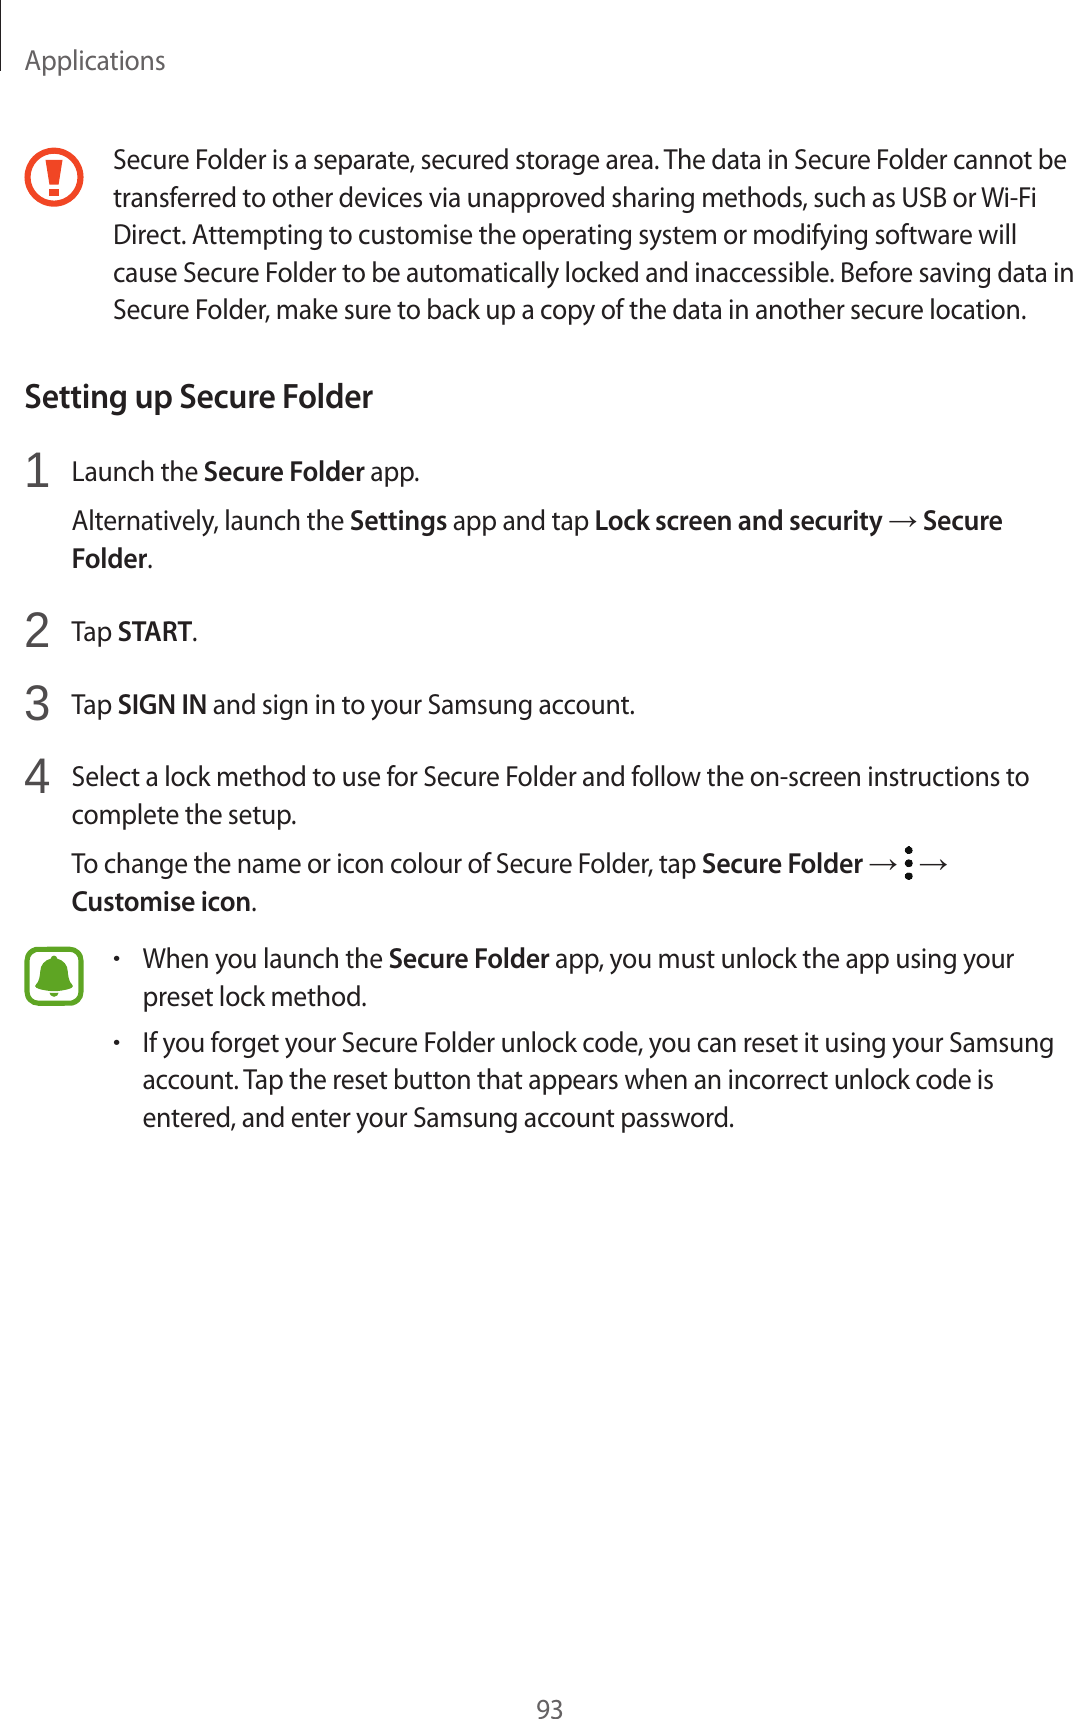 Applications93Secure Folder is a separate, secured storage area. The data in Secure Folder cannot be transferred to other devices via unapproved sharing methods, such as USB or Wi-Fi Direct. Attempting to customise the operating system or modifying software will cause Secure Folder to be automatically locked and inaccessible. Before saving data in Secure Folder, make sure to back up a copy of the data in another secure location.Setting up Secure Folder1  Launch the Secure Folder app.Alternatively, launch the Settings app and tap Lock screen and security → Secure Folder.2  Tap START.3  Tap SIGN IN and sign in to your Samsung account.4  Select a lock method to use for Secure Folder and follow the on-screen instructions to complete the setup.To change the name or icon colour of Secure Folder, tap Secure Folder →   → Customise icon.•When you launch the Secure Folder app, you must unlock the app using your preset lock method.•If you forget your Secure Folder unlock code, you can reset it using your Samsung account. Tap the reset button that appears when an incorrect unlock code is entered, and enter your Samsung account password.